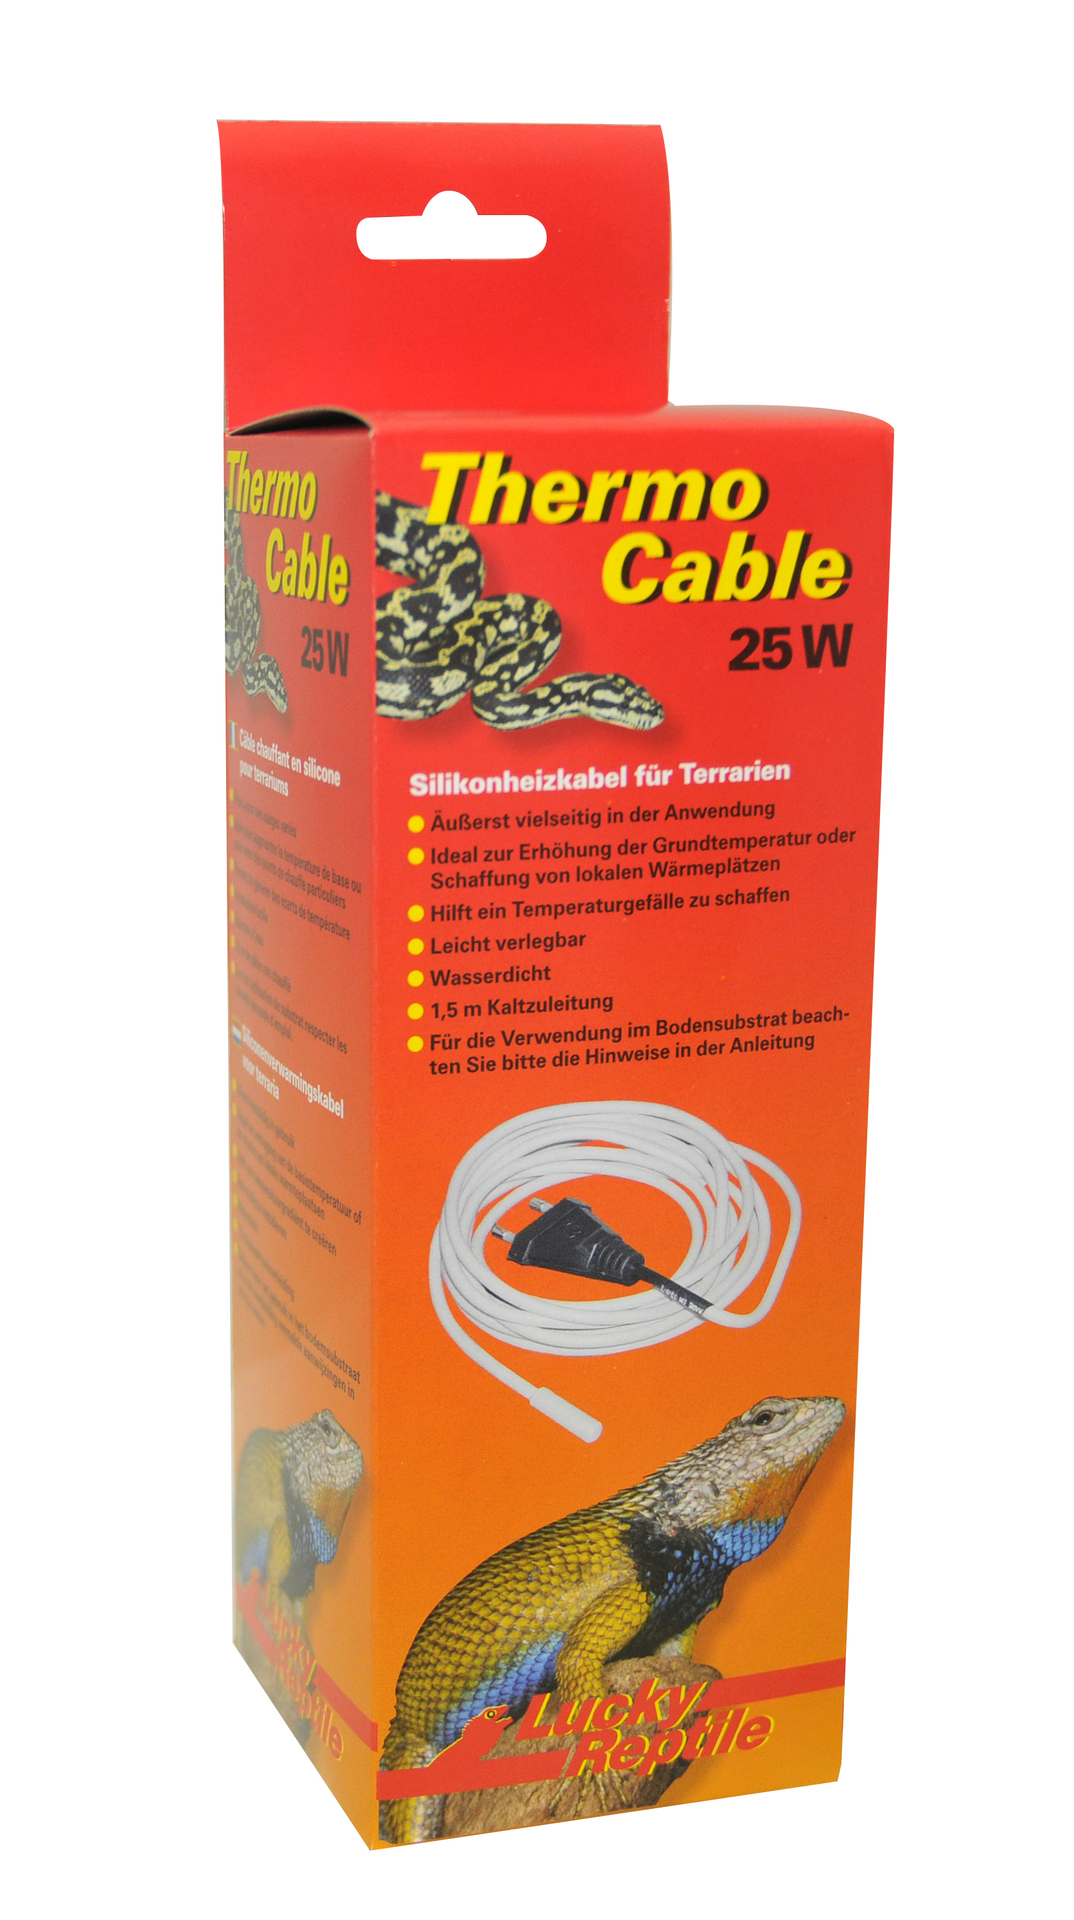 Thermo Cable